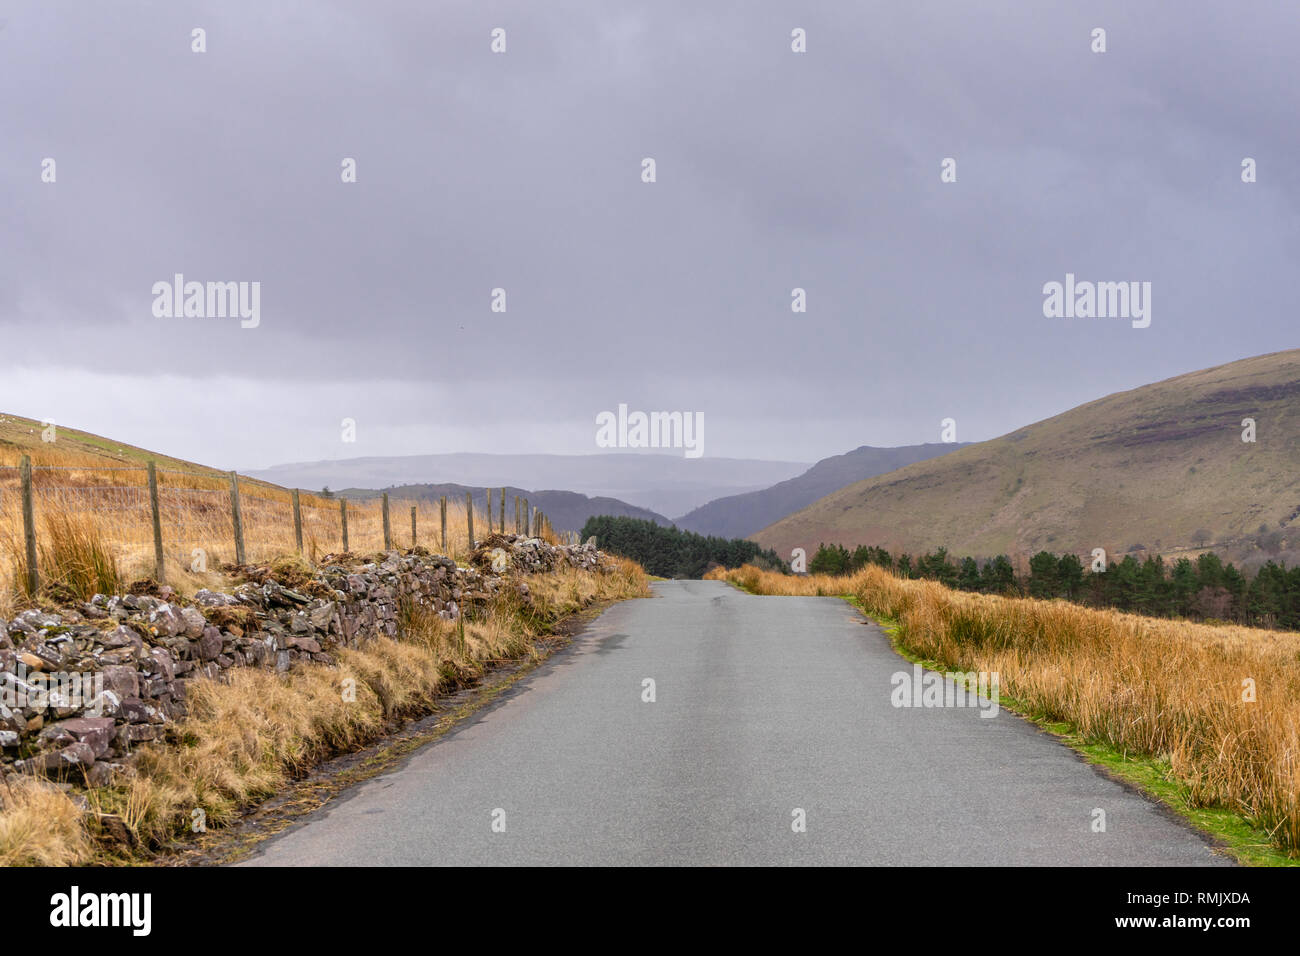 Unnamed Mountain road through the Brecon Beacons National Park during overcast weather conditions, Wales, UK Stock Photo